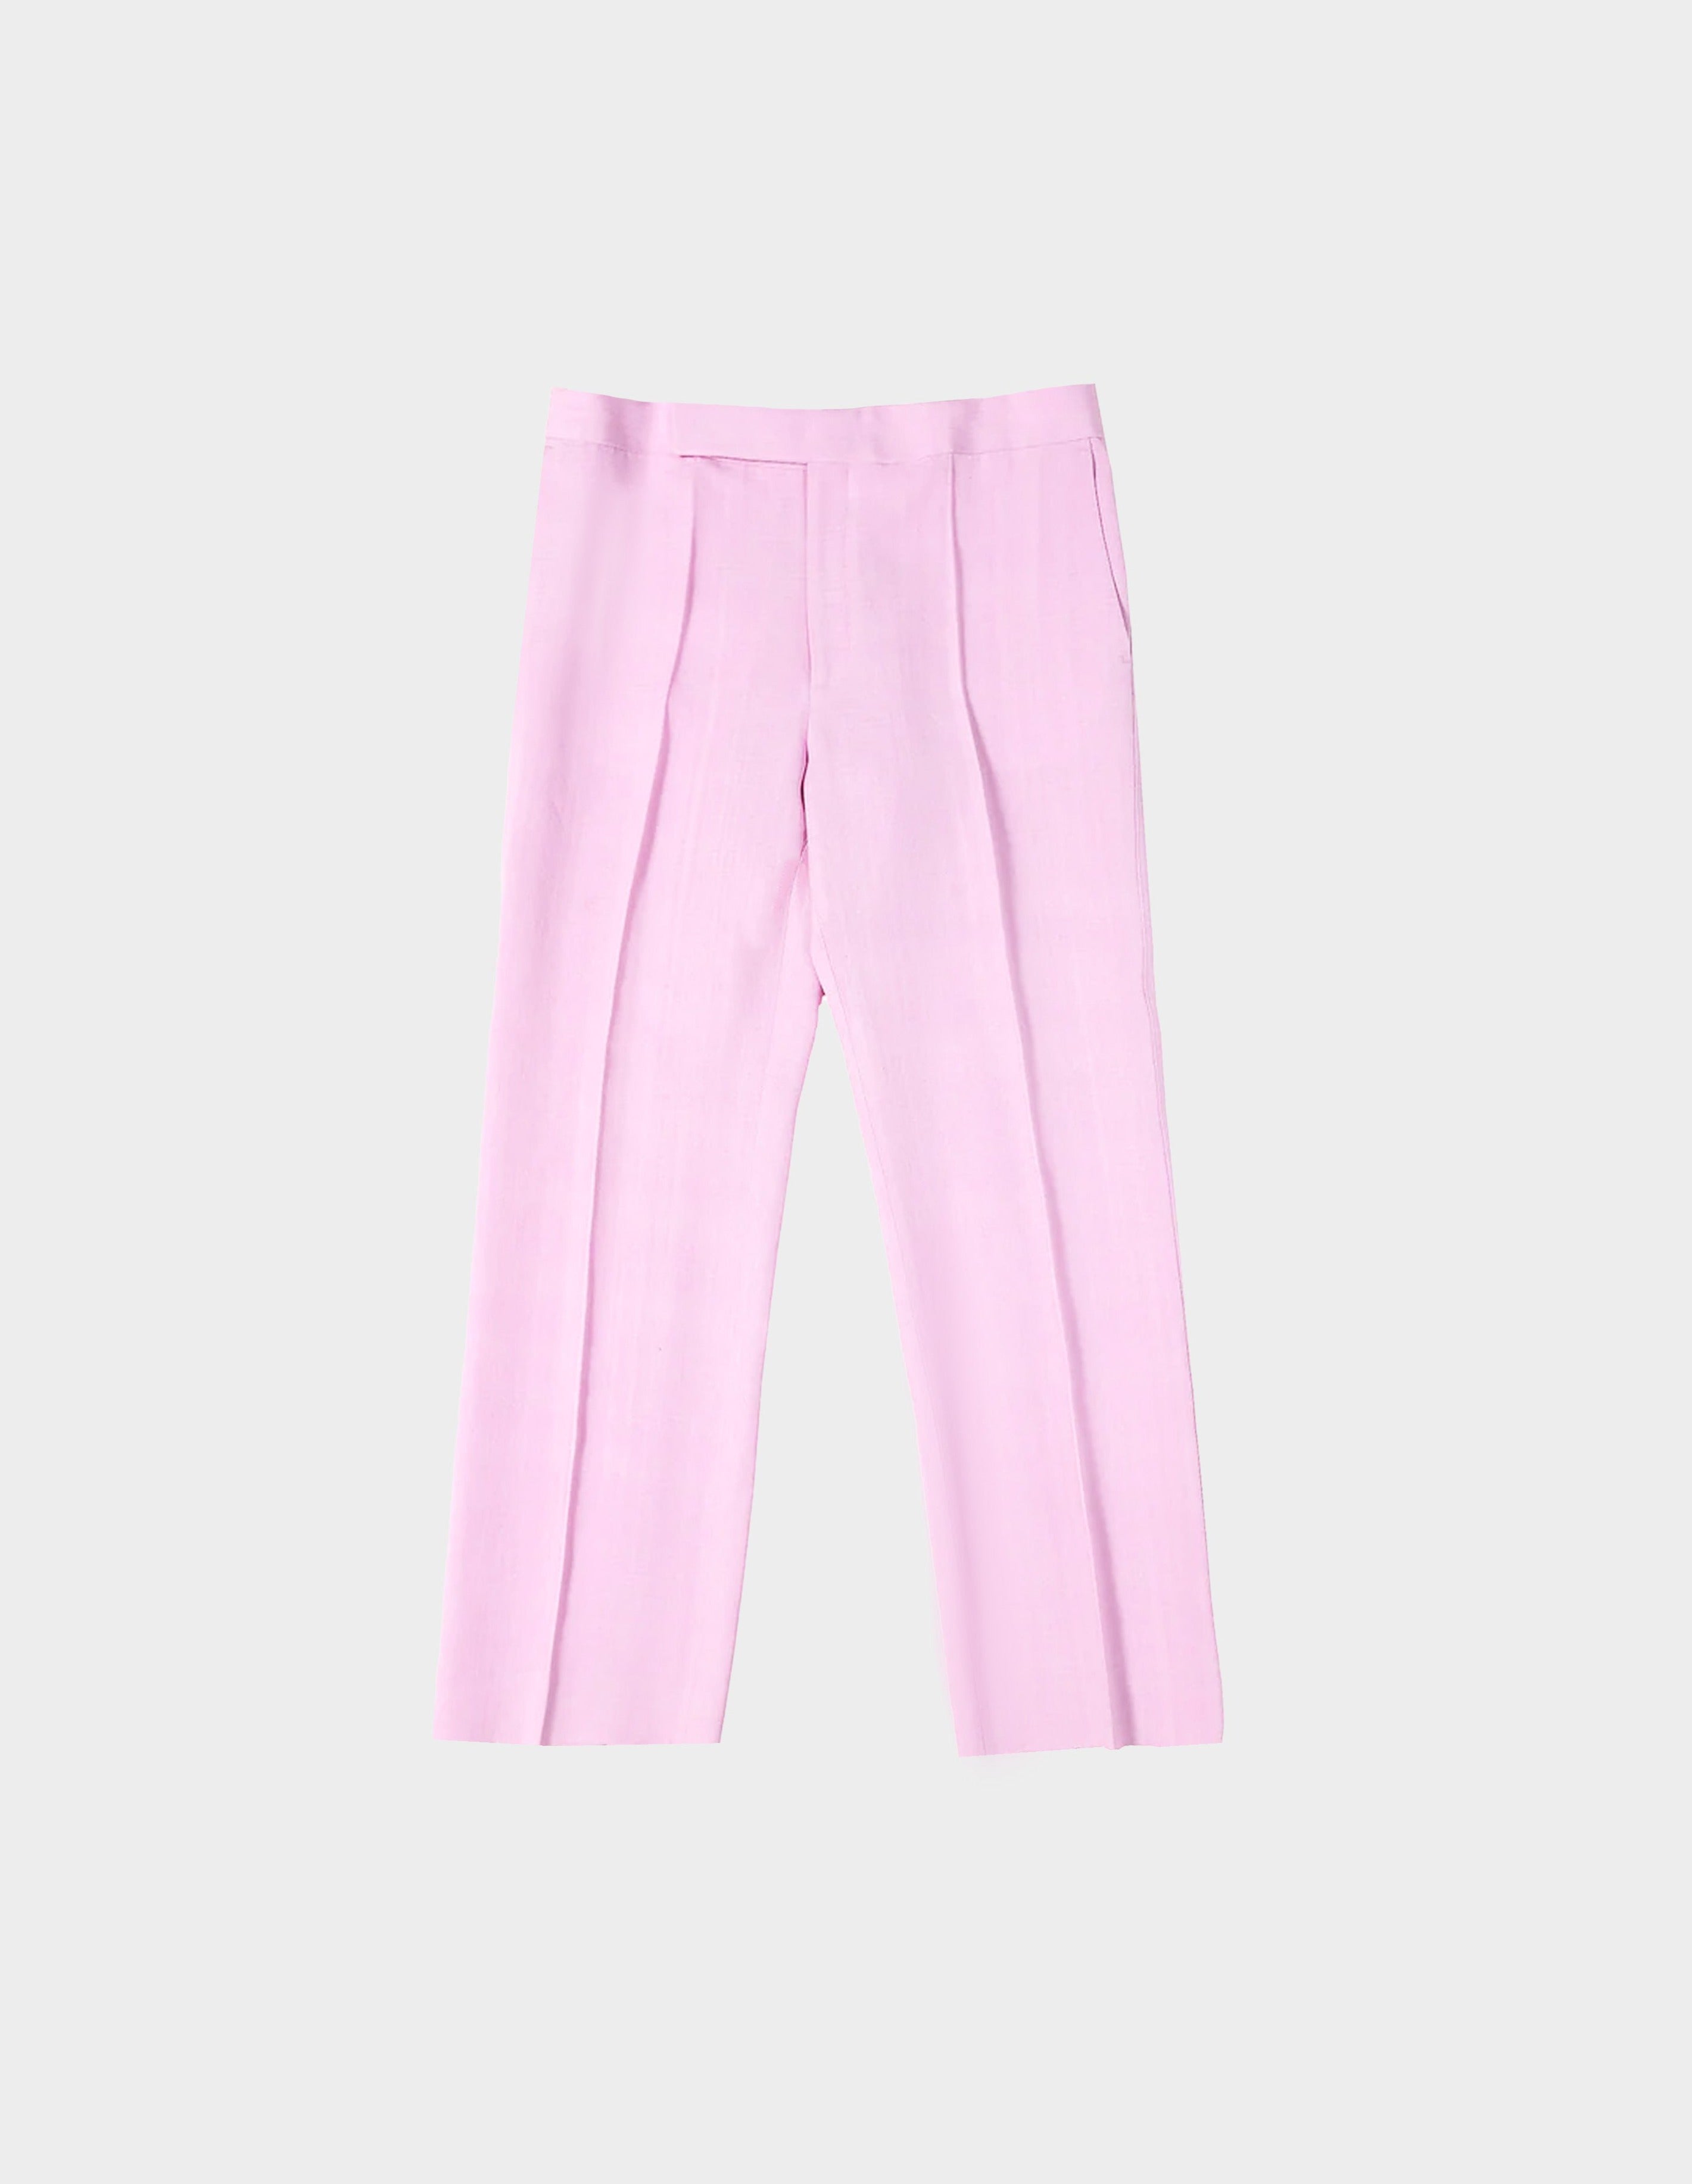 Céline by Pheobe Philo Fall 2011 Pink Pleated Trousers · INTO